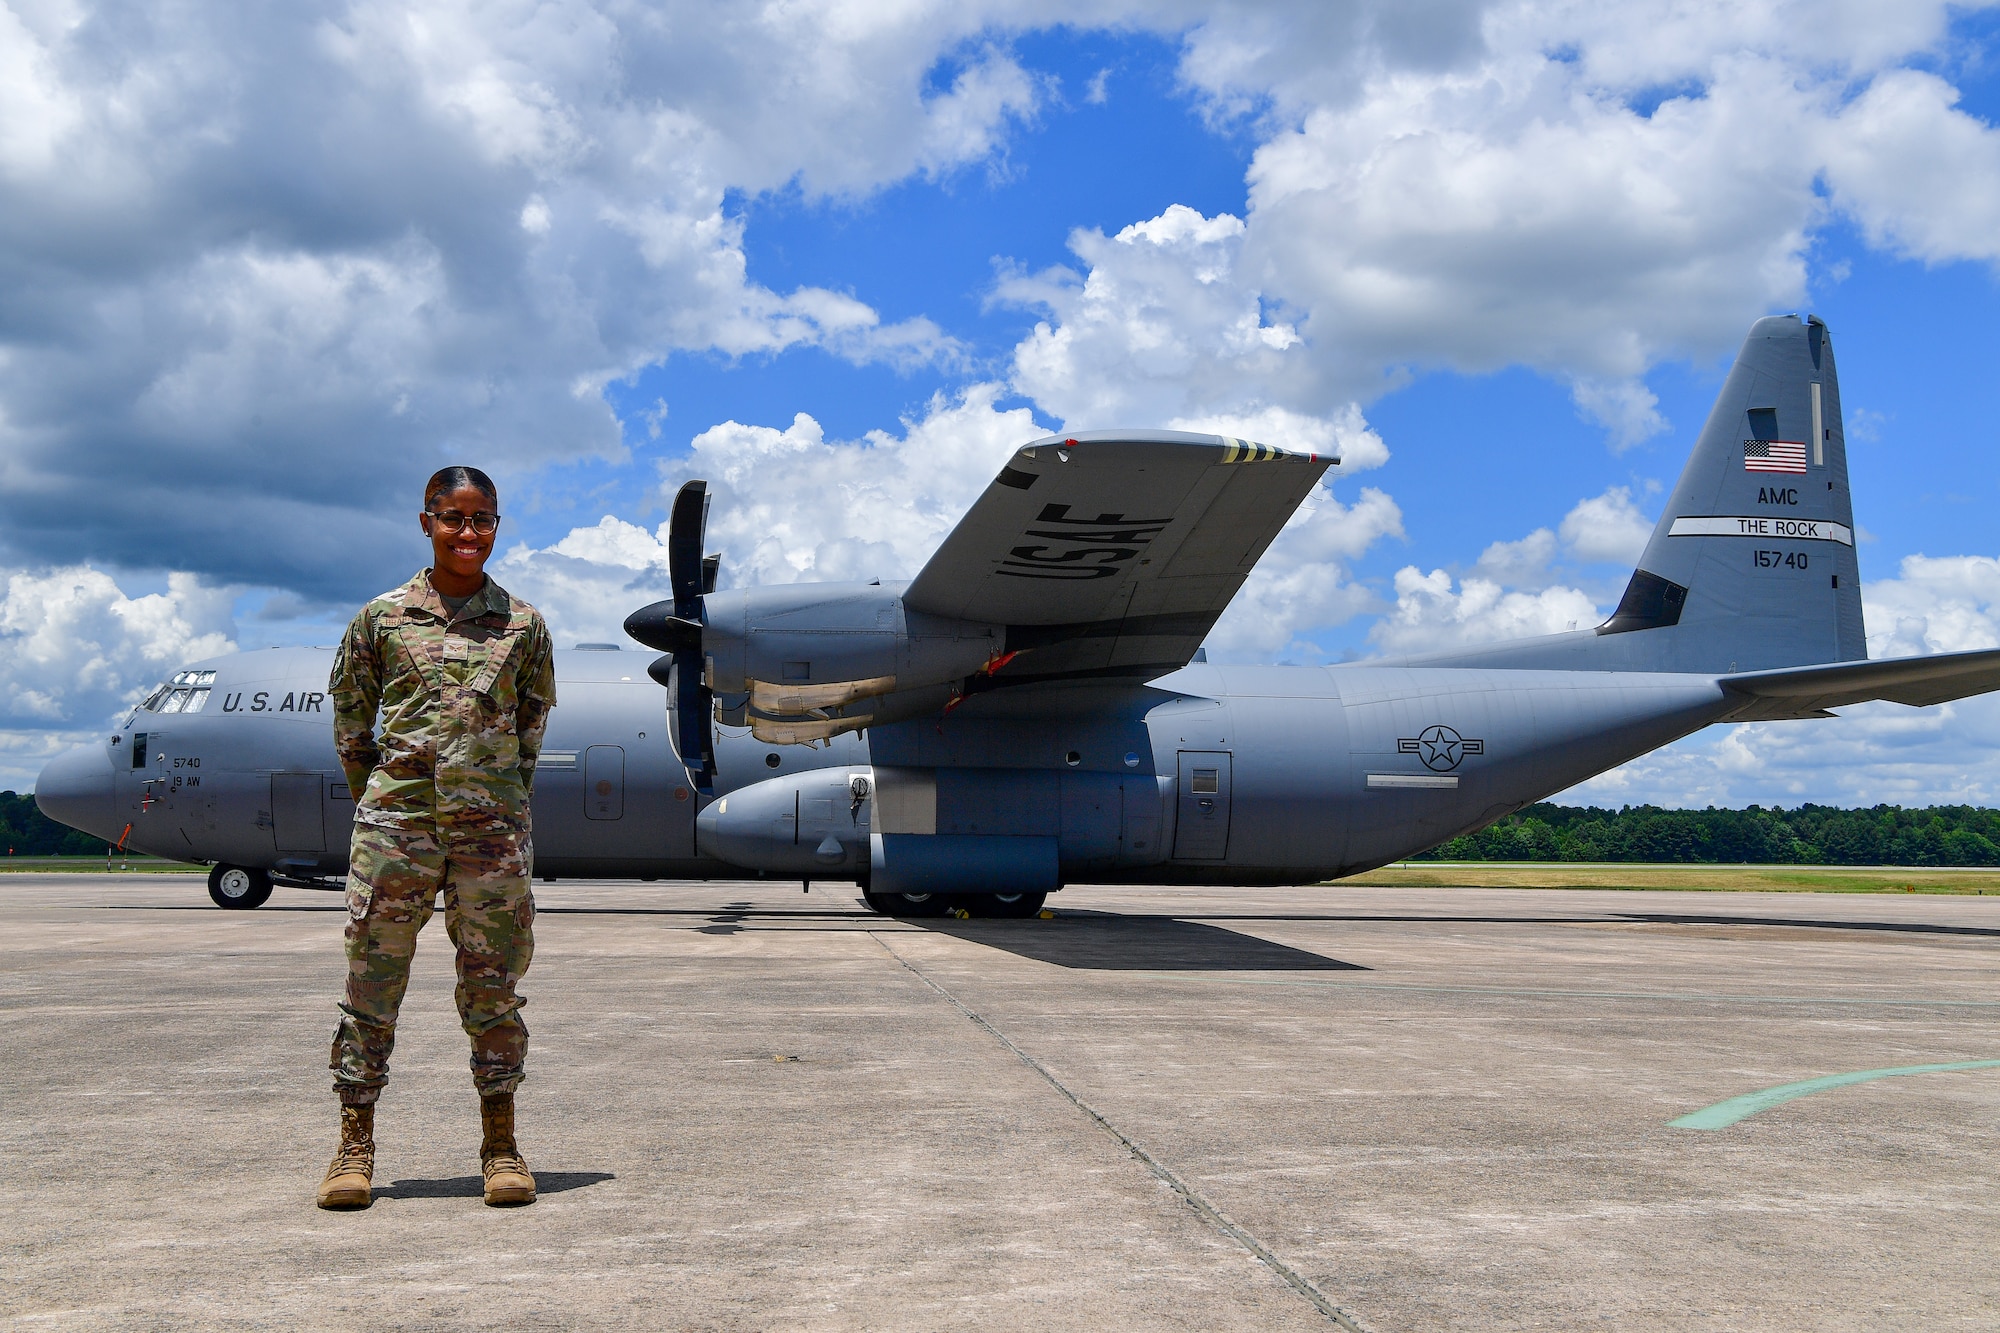 An airman poses for a photo in front of a C-130.